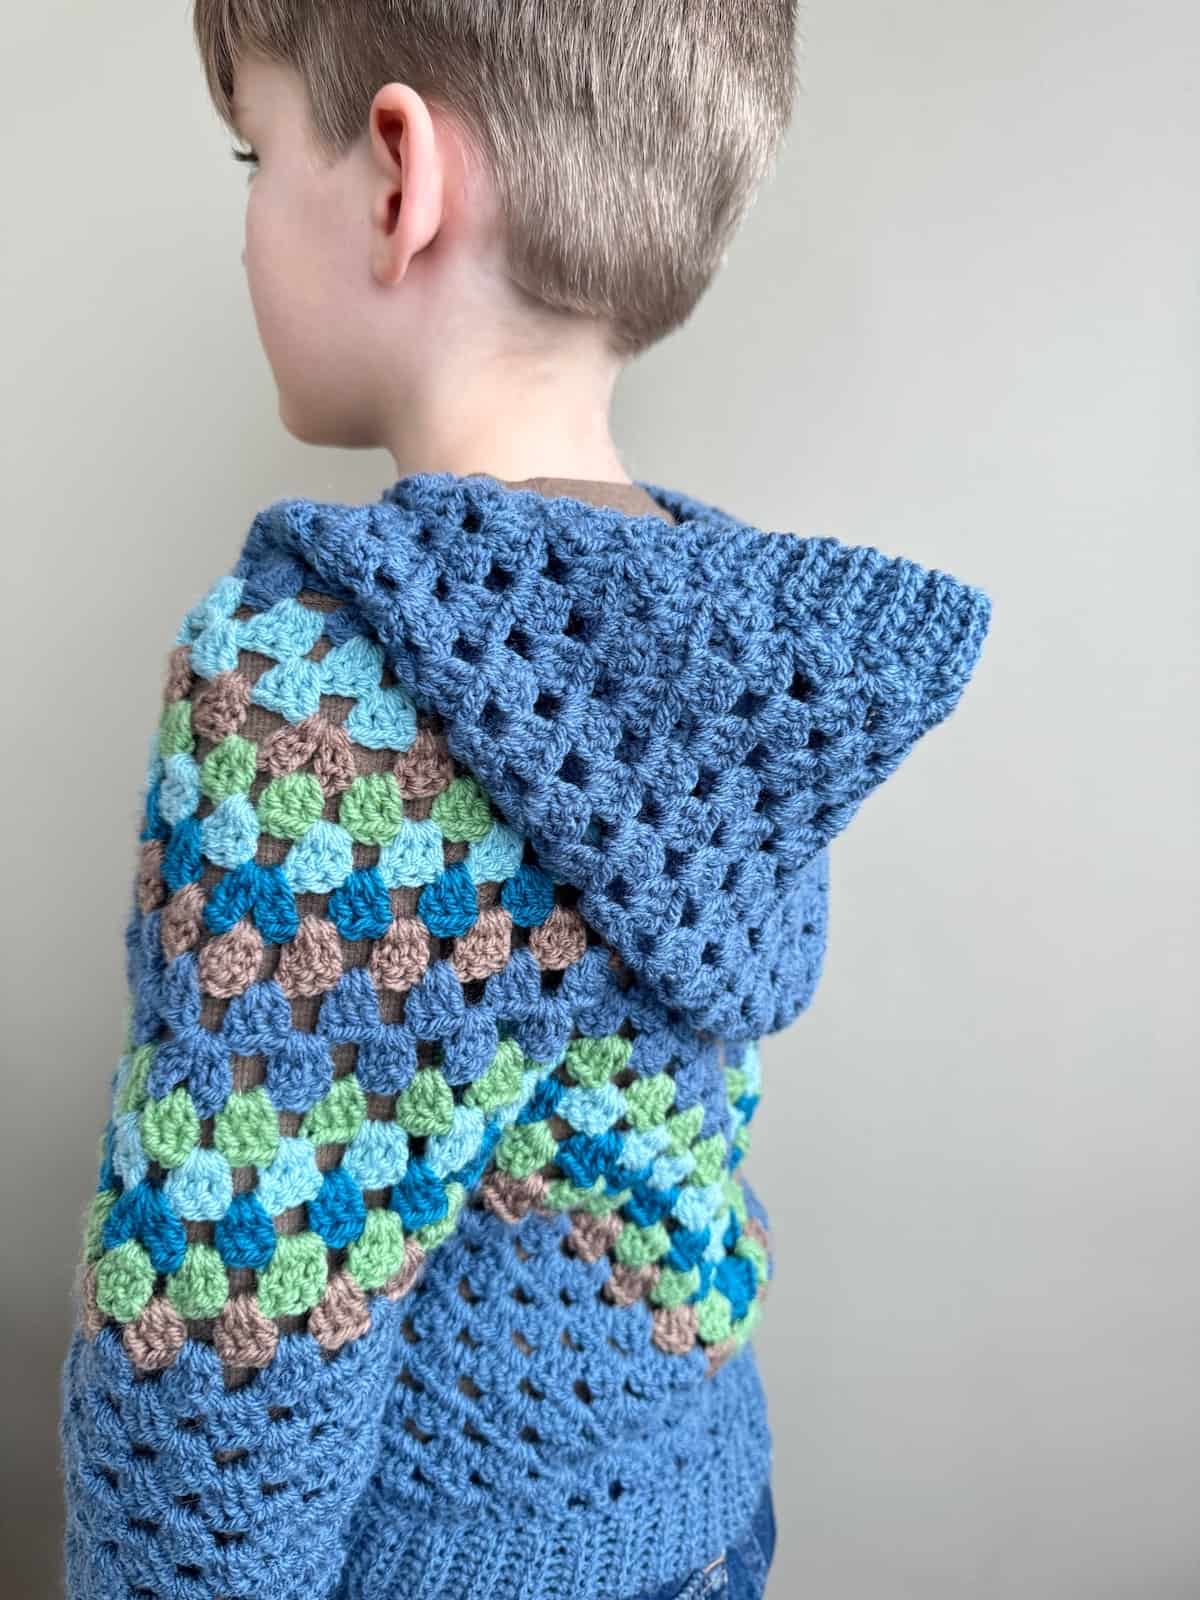 A young boy wearing a blue crocheted hoodie.